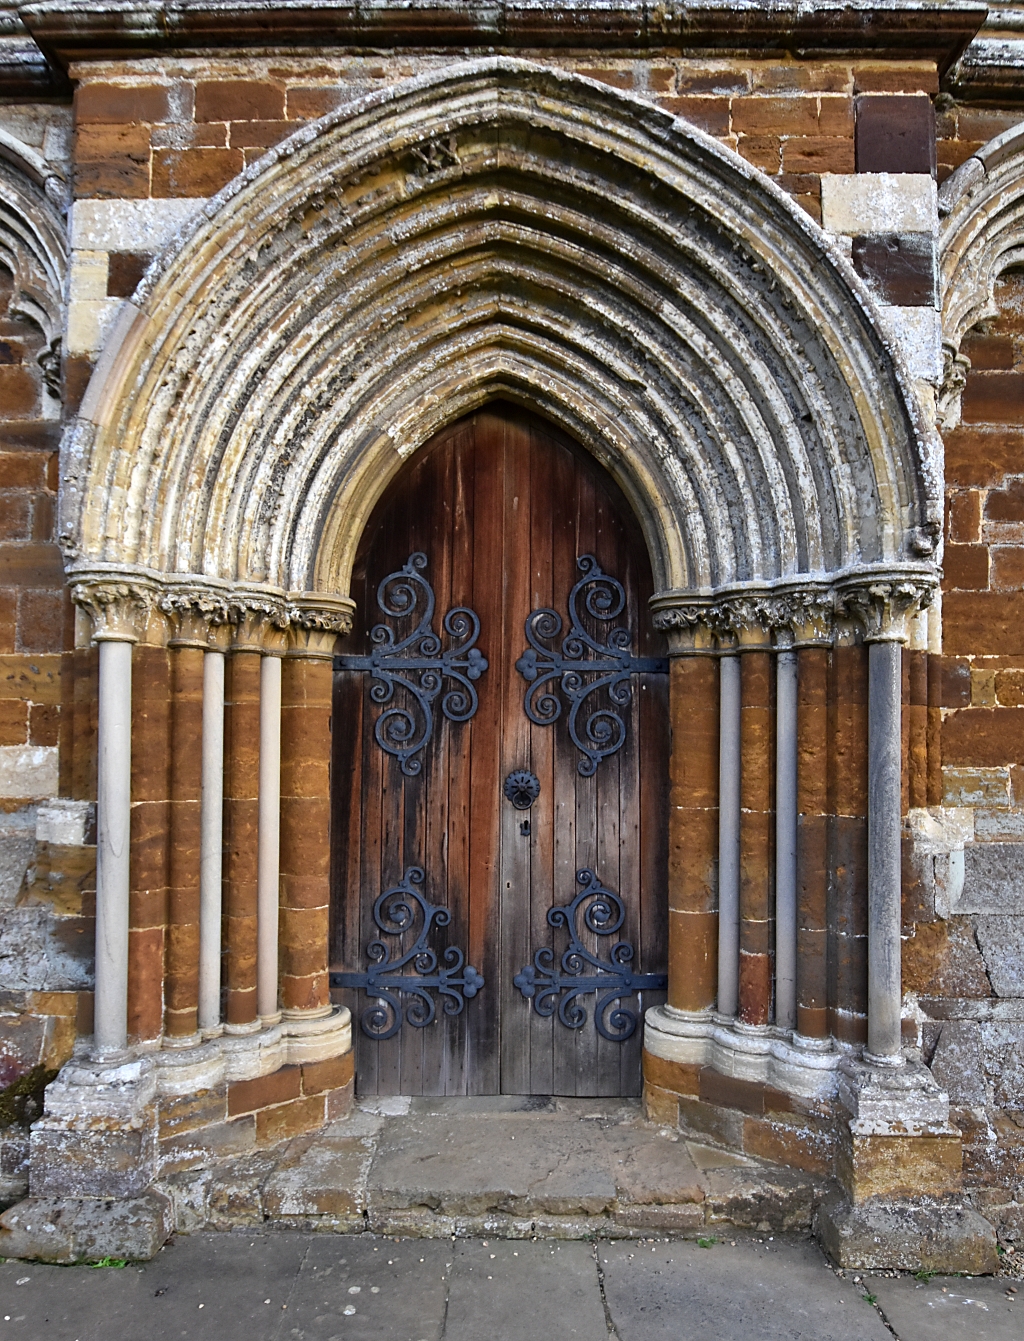 The Entrance to The Priory Church of St. Mary's